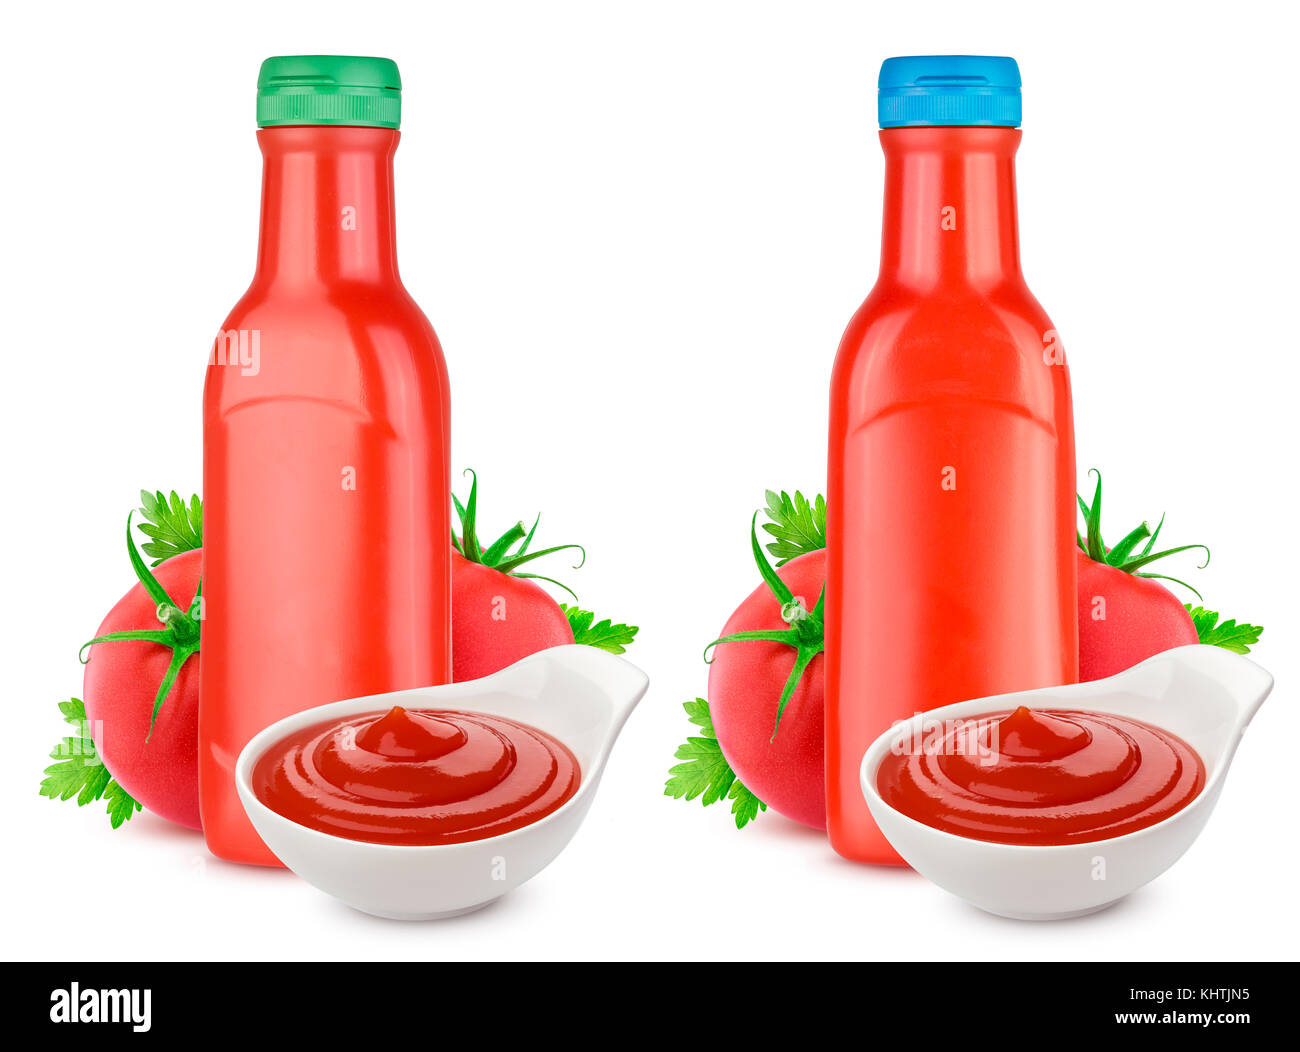 Tomato ketchup bottle, ketchup in bowl and fresh tomatoes isolated on white background Stock Photo